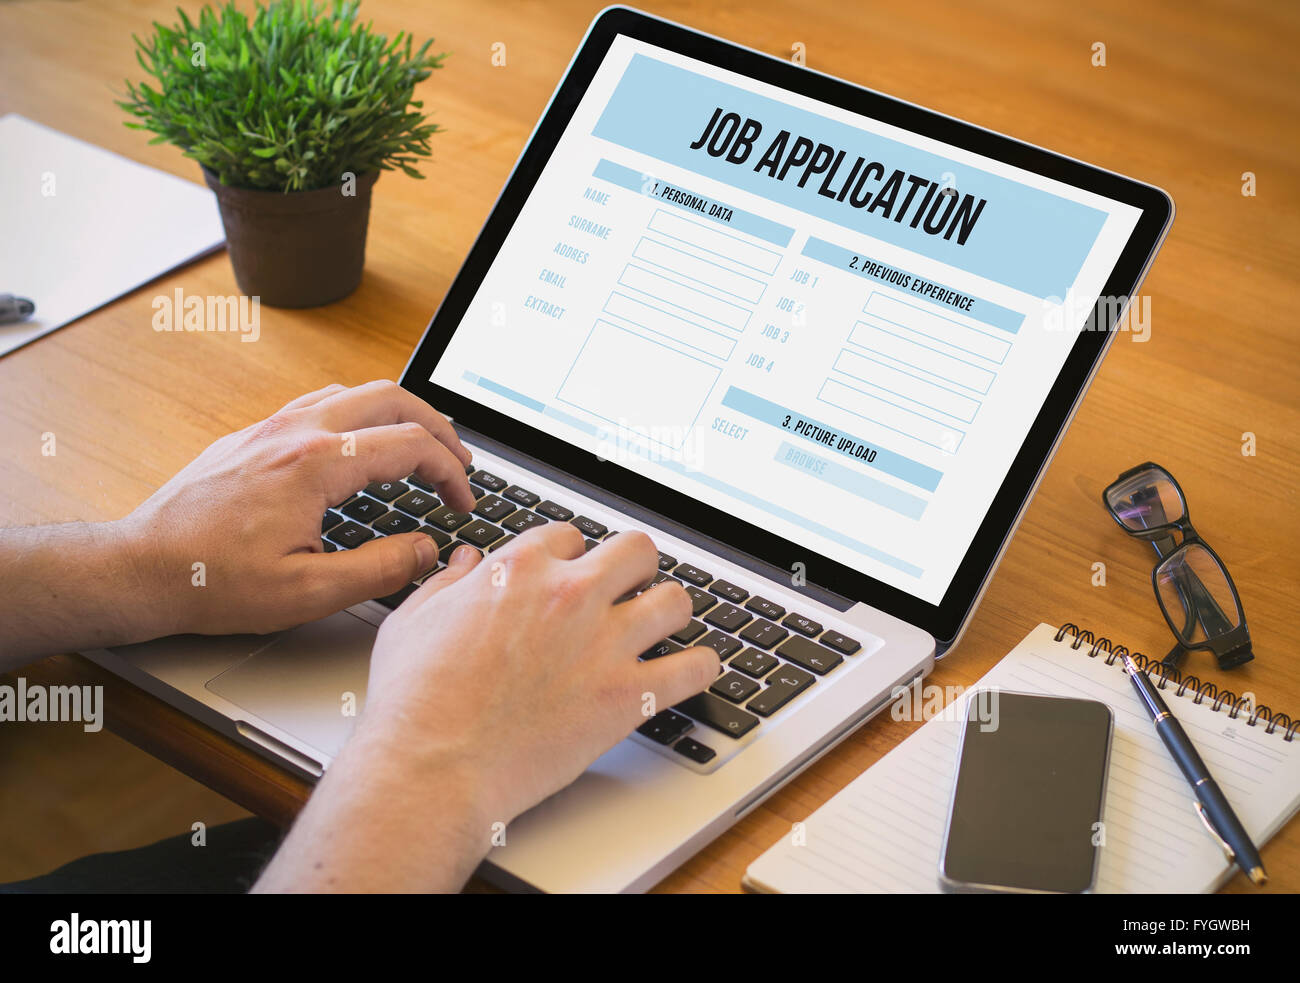 Businessman at work. Close-up top view of man working on laptop job application. All screen graphics are made up. Stock Photo